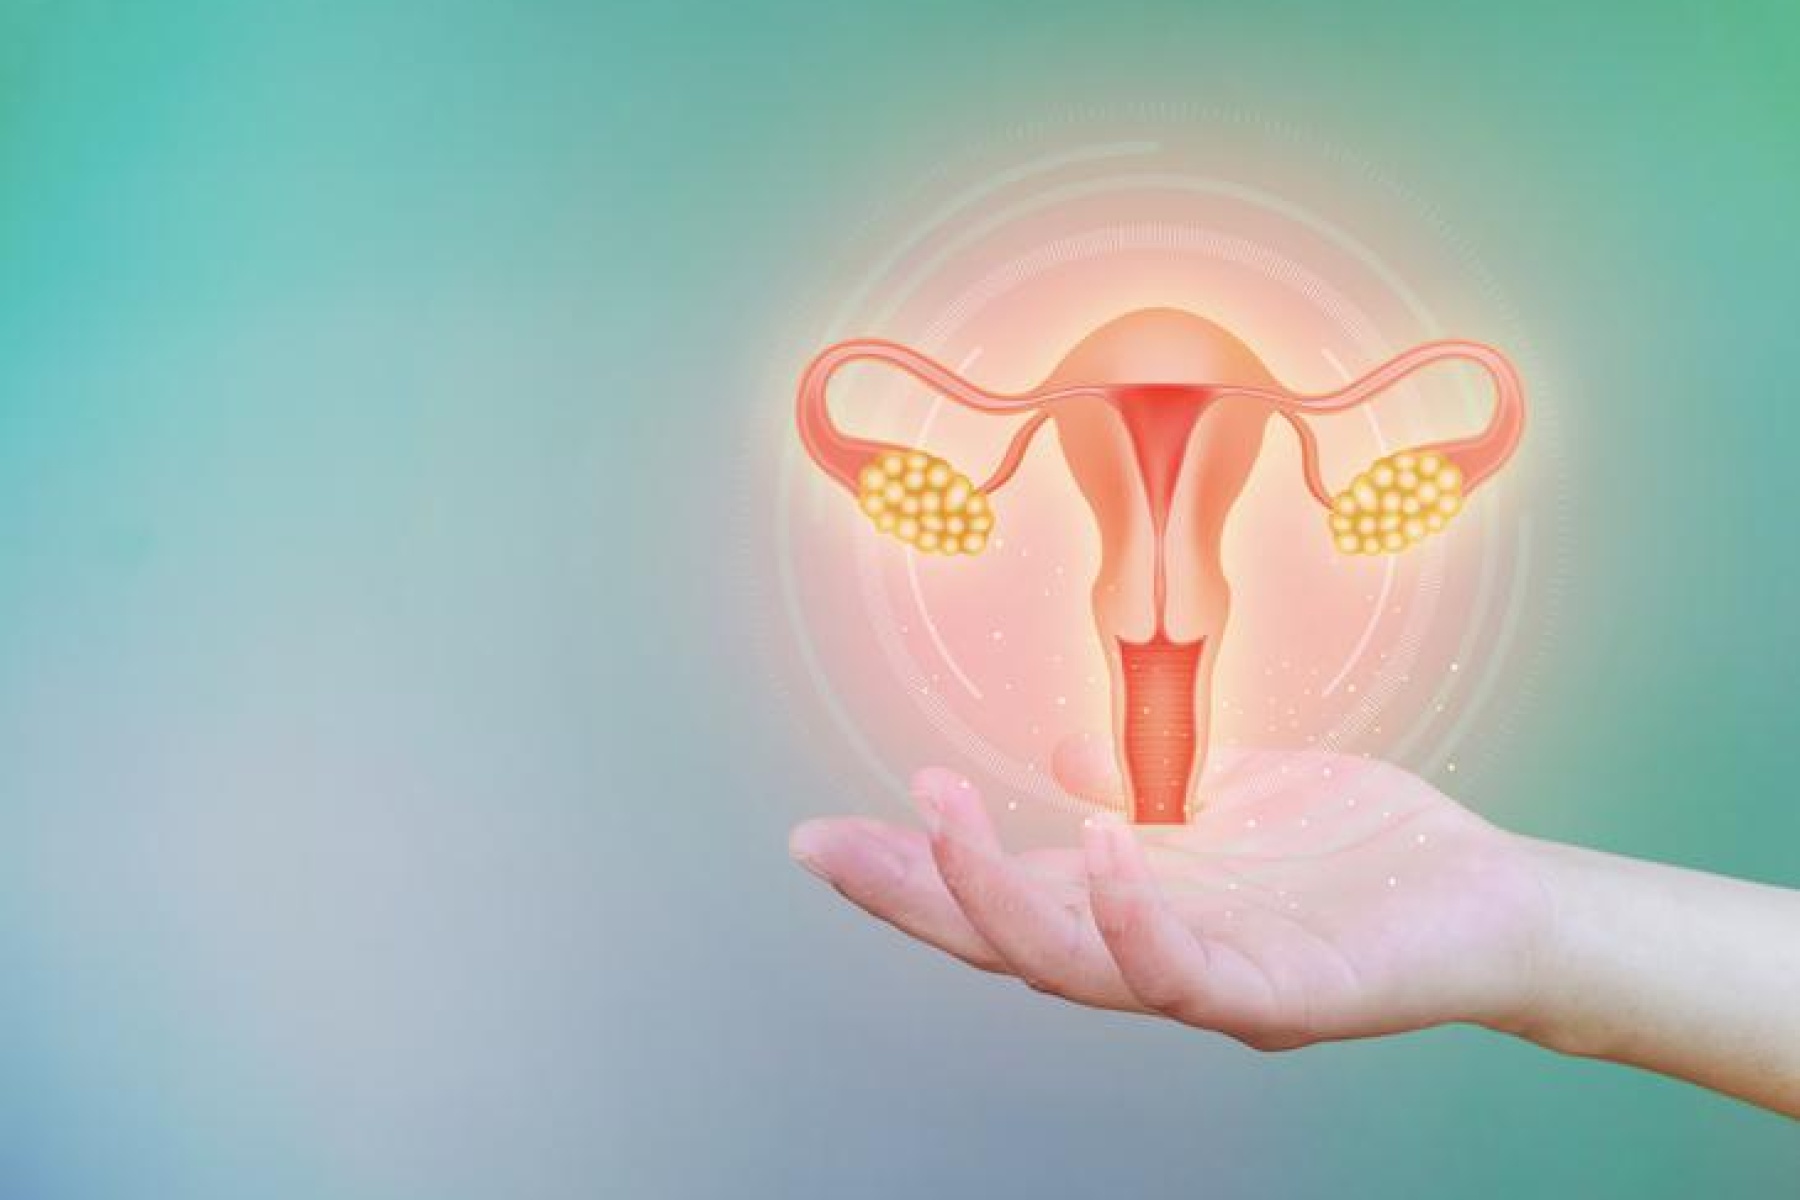 PCOS: Diagnosing and treating polycystic ovary syndrome